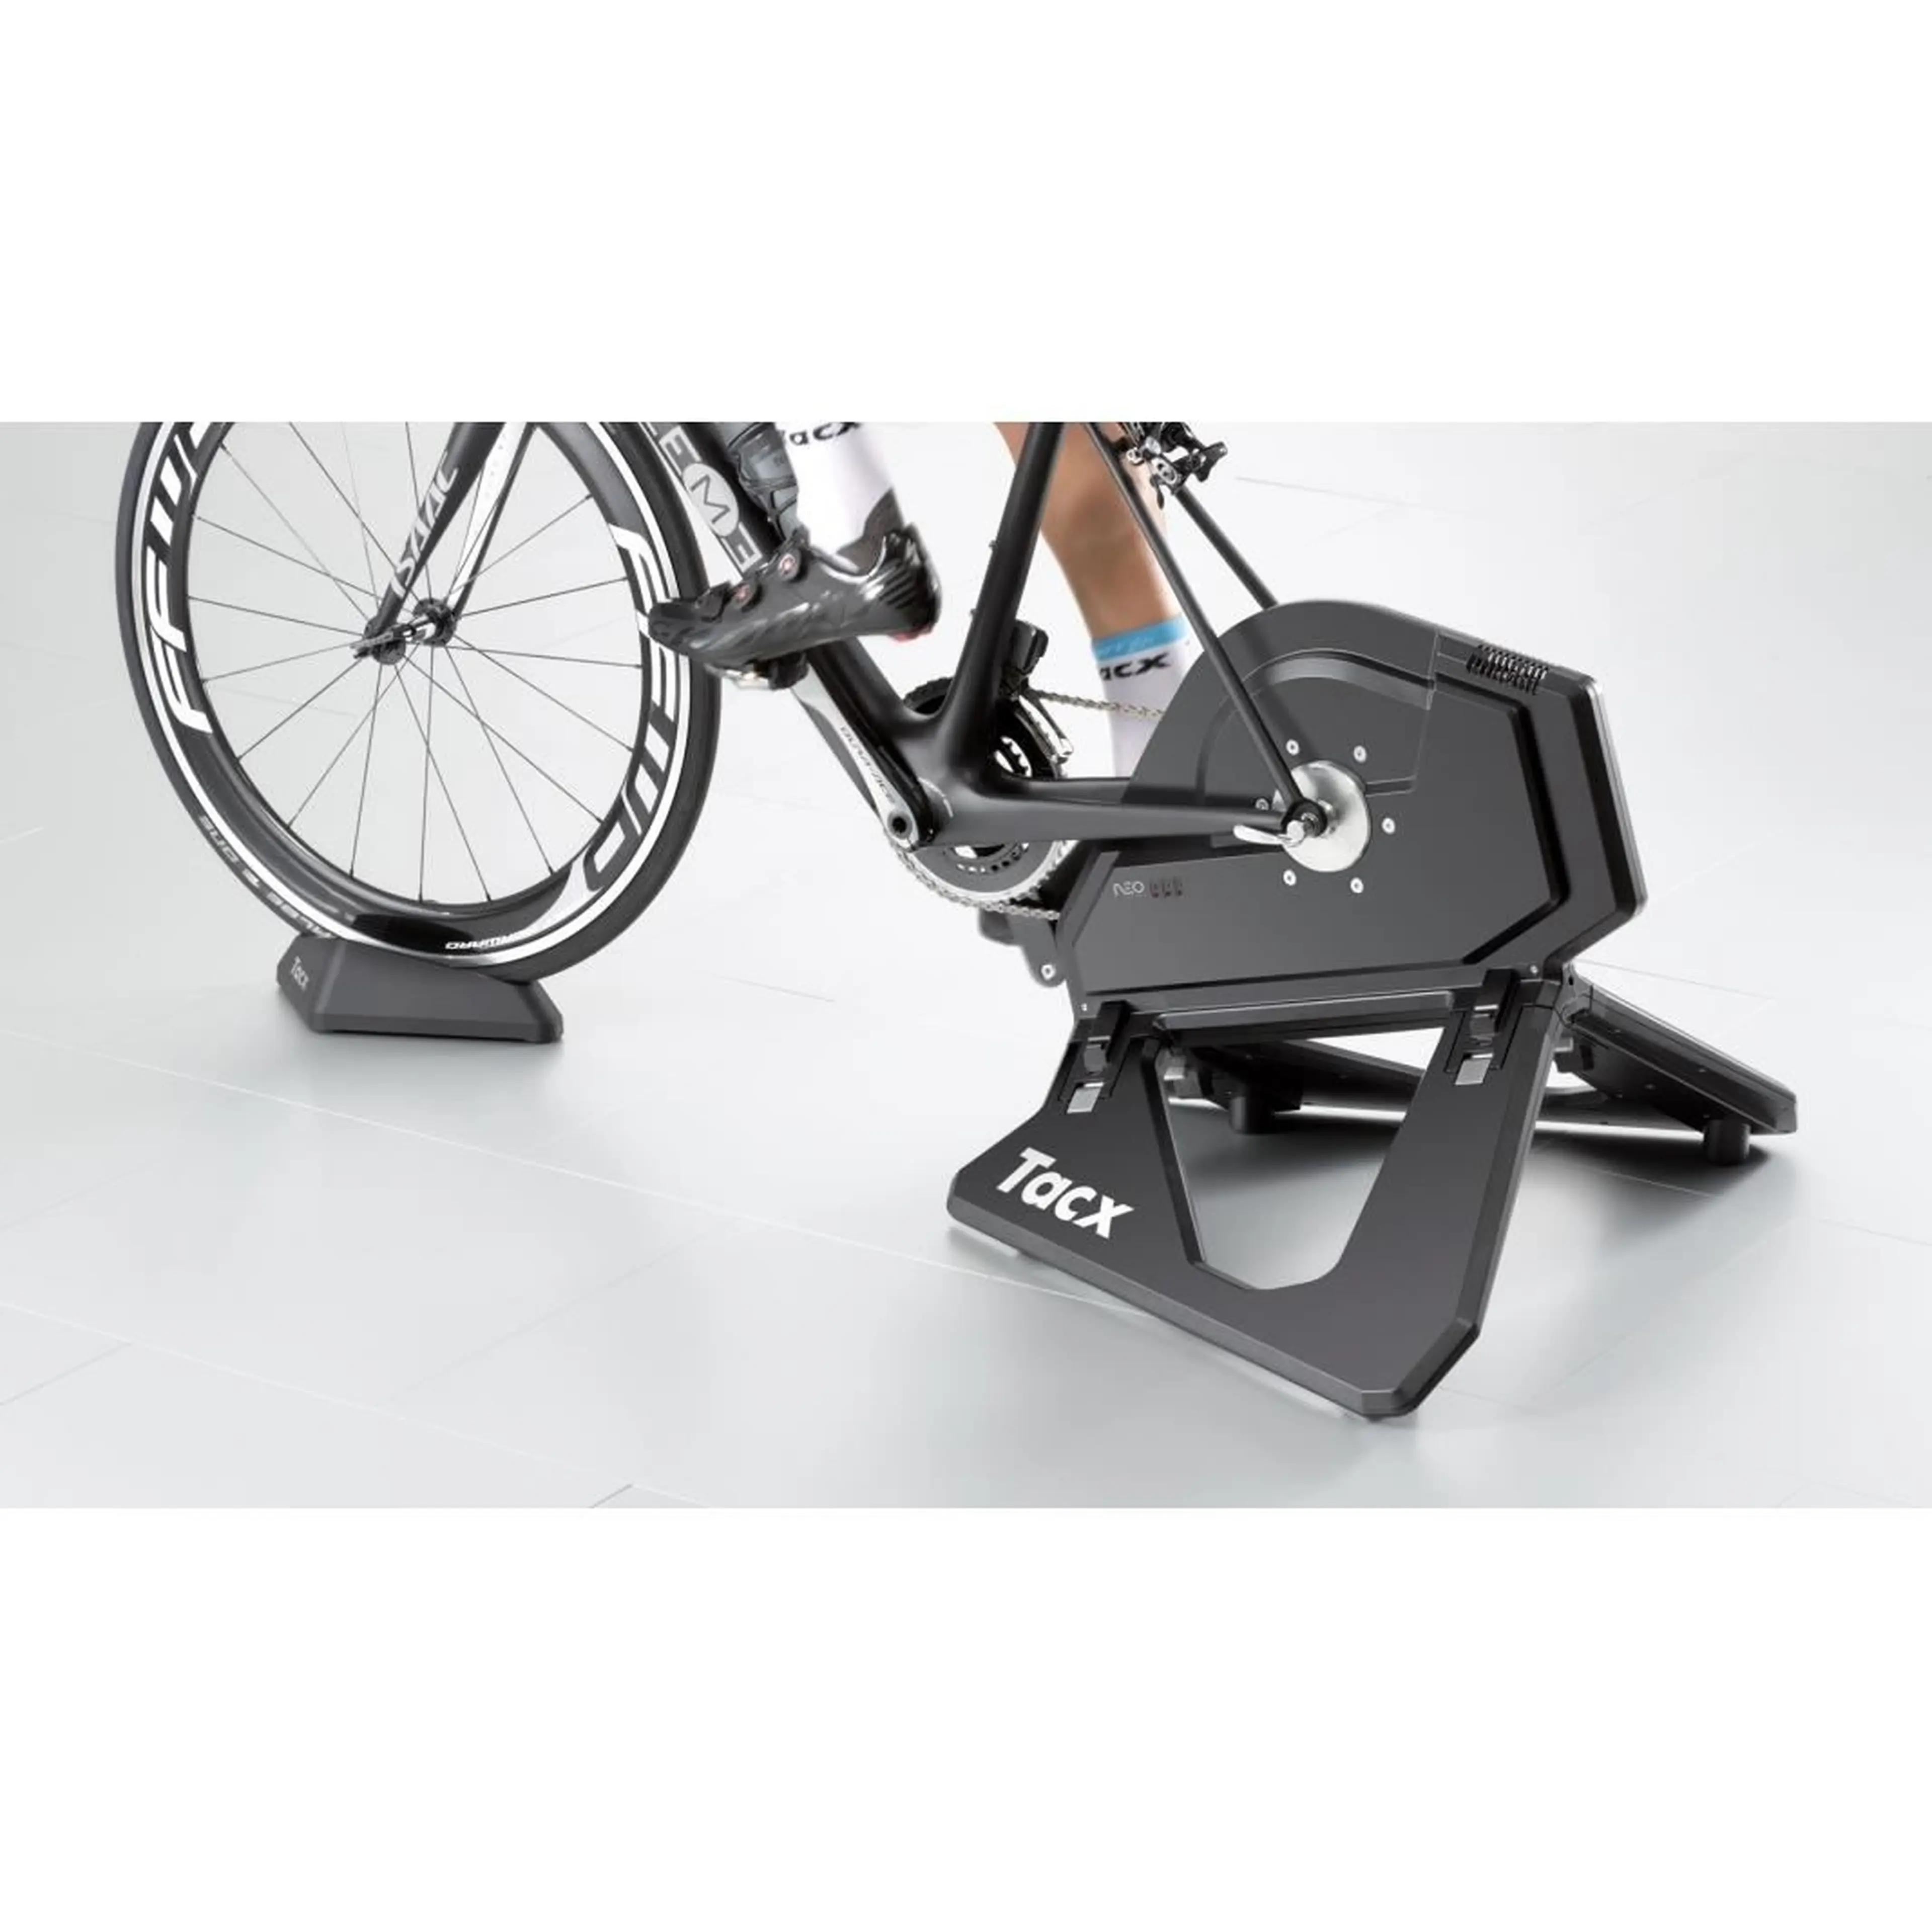 3. Home Trainer ciclism TACX NEO Smart Interactive Direct Drive T2800